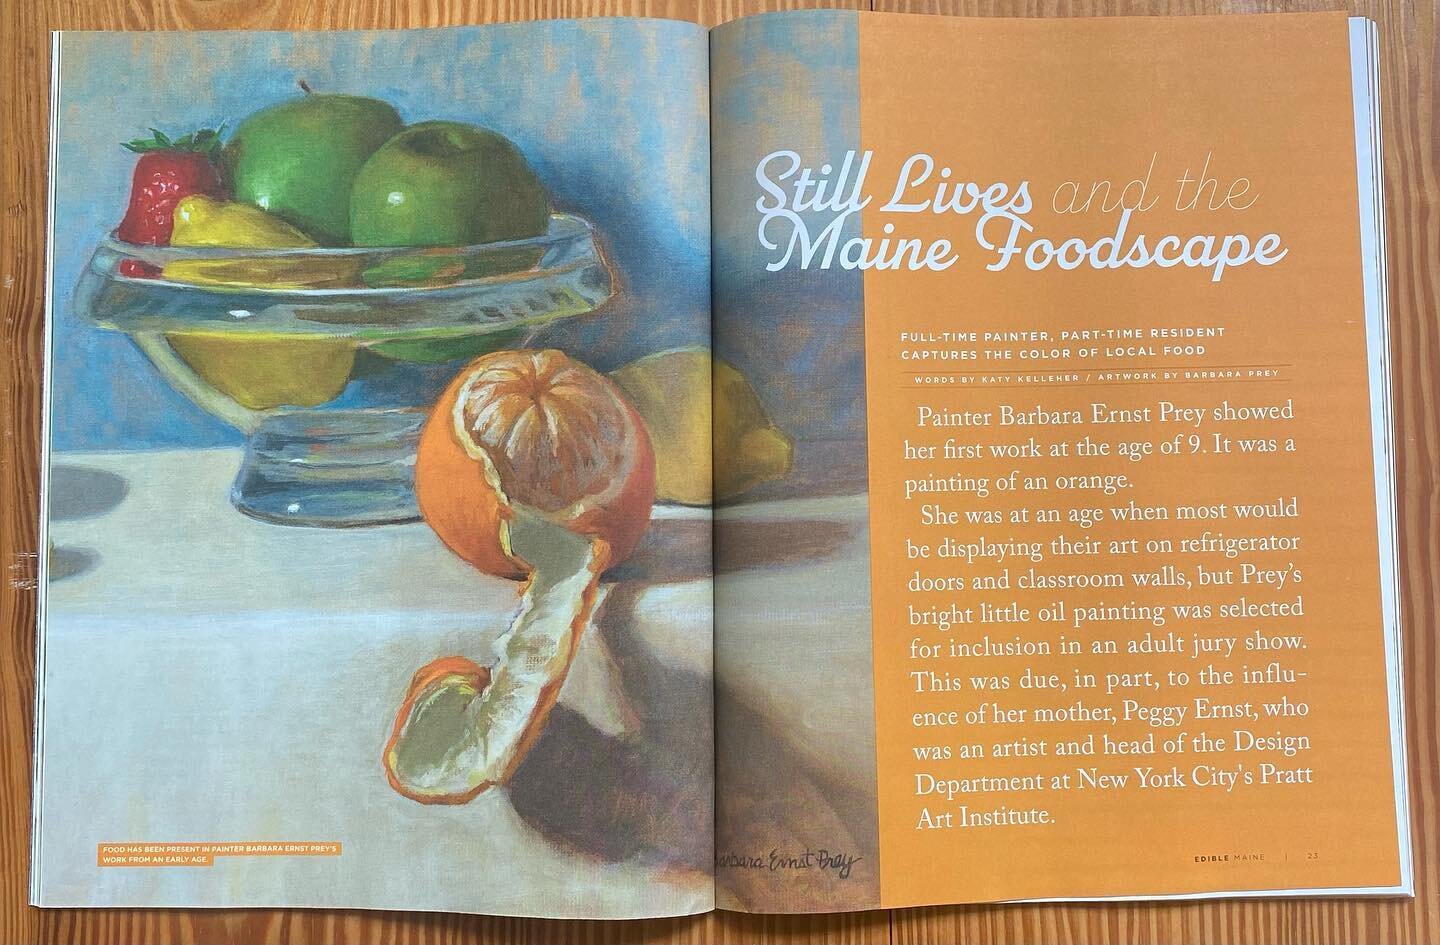 Find a local distributor or visit www.ediblemaine.com to view Barbara's &quot;Still Lives and the Maine Foodscape&quot; article in Issue 17 / Summer 2021 of @ediblemaine Magazine. 
-
-
-
#maine #barbaraprey #artist #femaleartist #article #ediblemaine